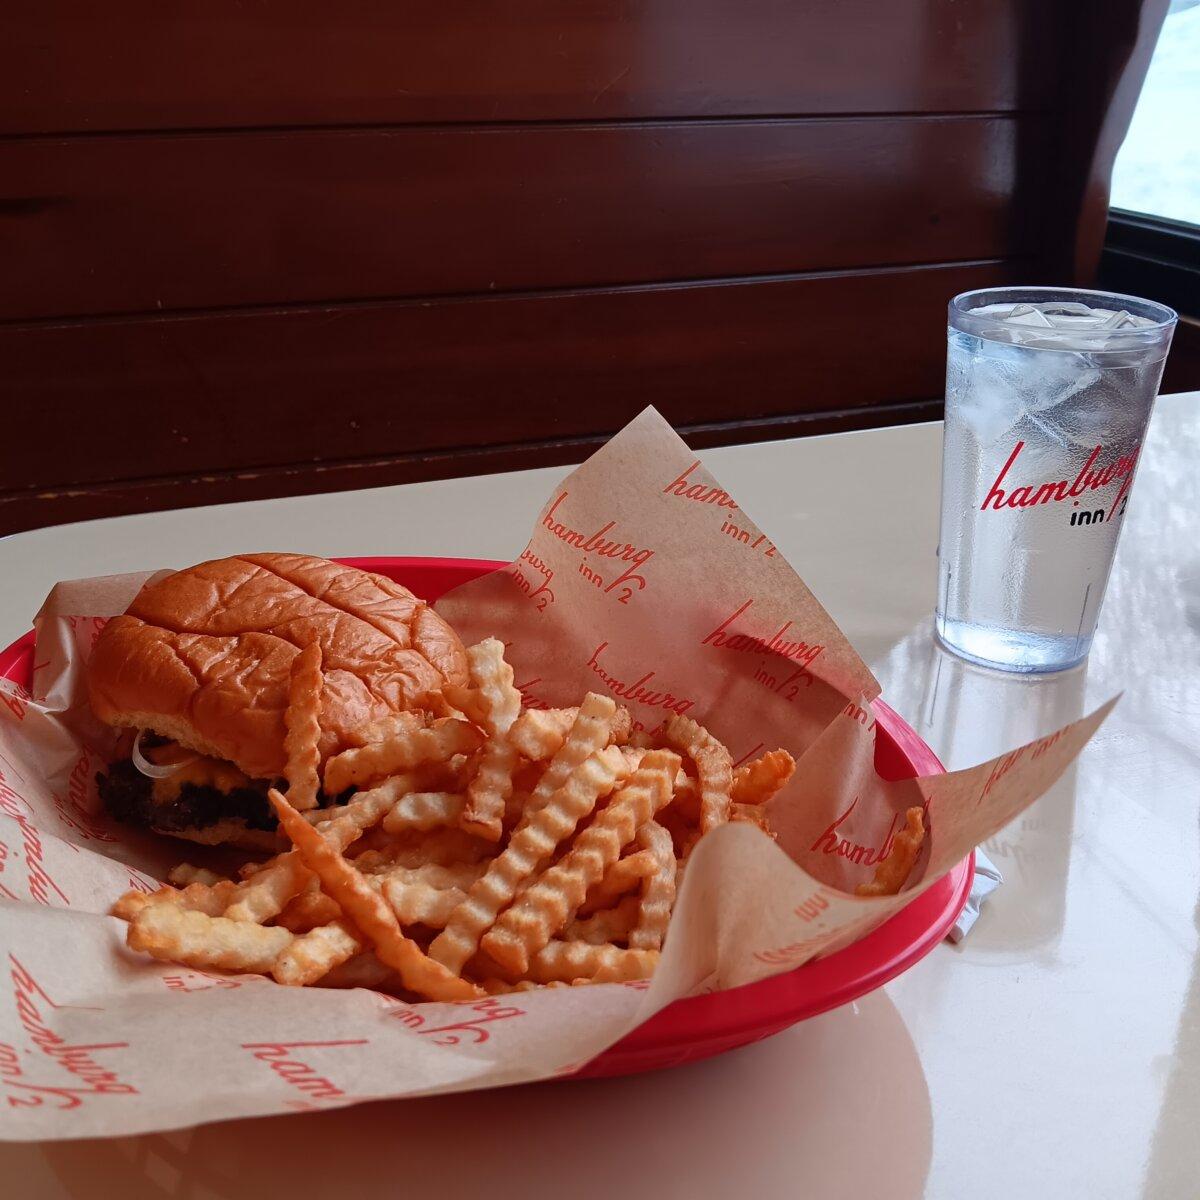 A burger and fries at the Hamburg Inn No. 2 in Iowa City, Iowa, on Jan. 13, 2024. (Nathan Worcester/The Epoch Times)